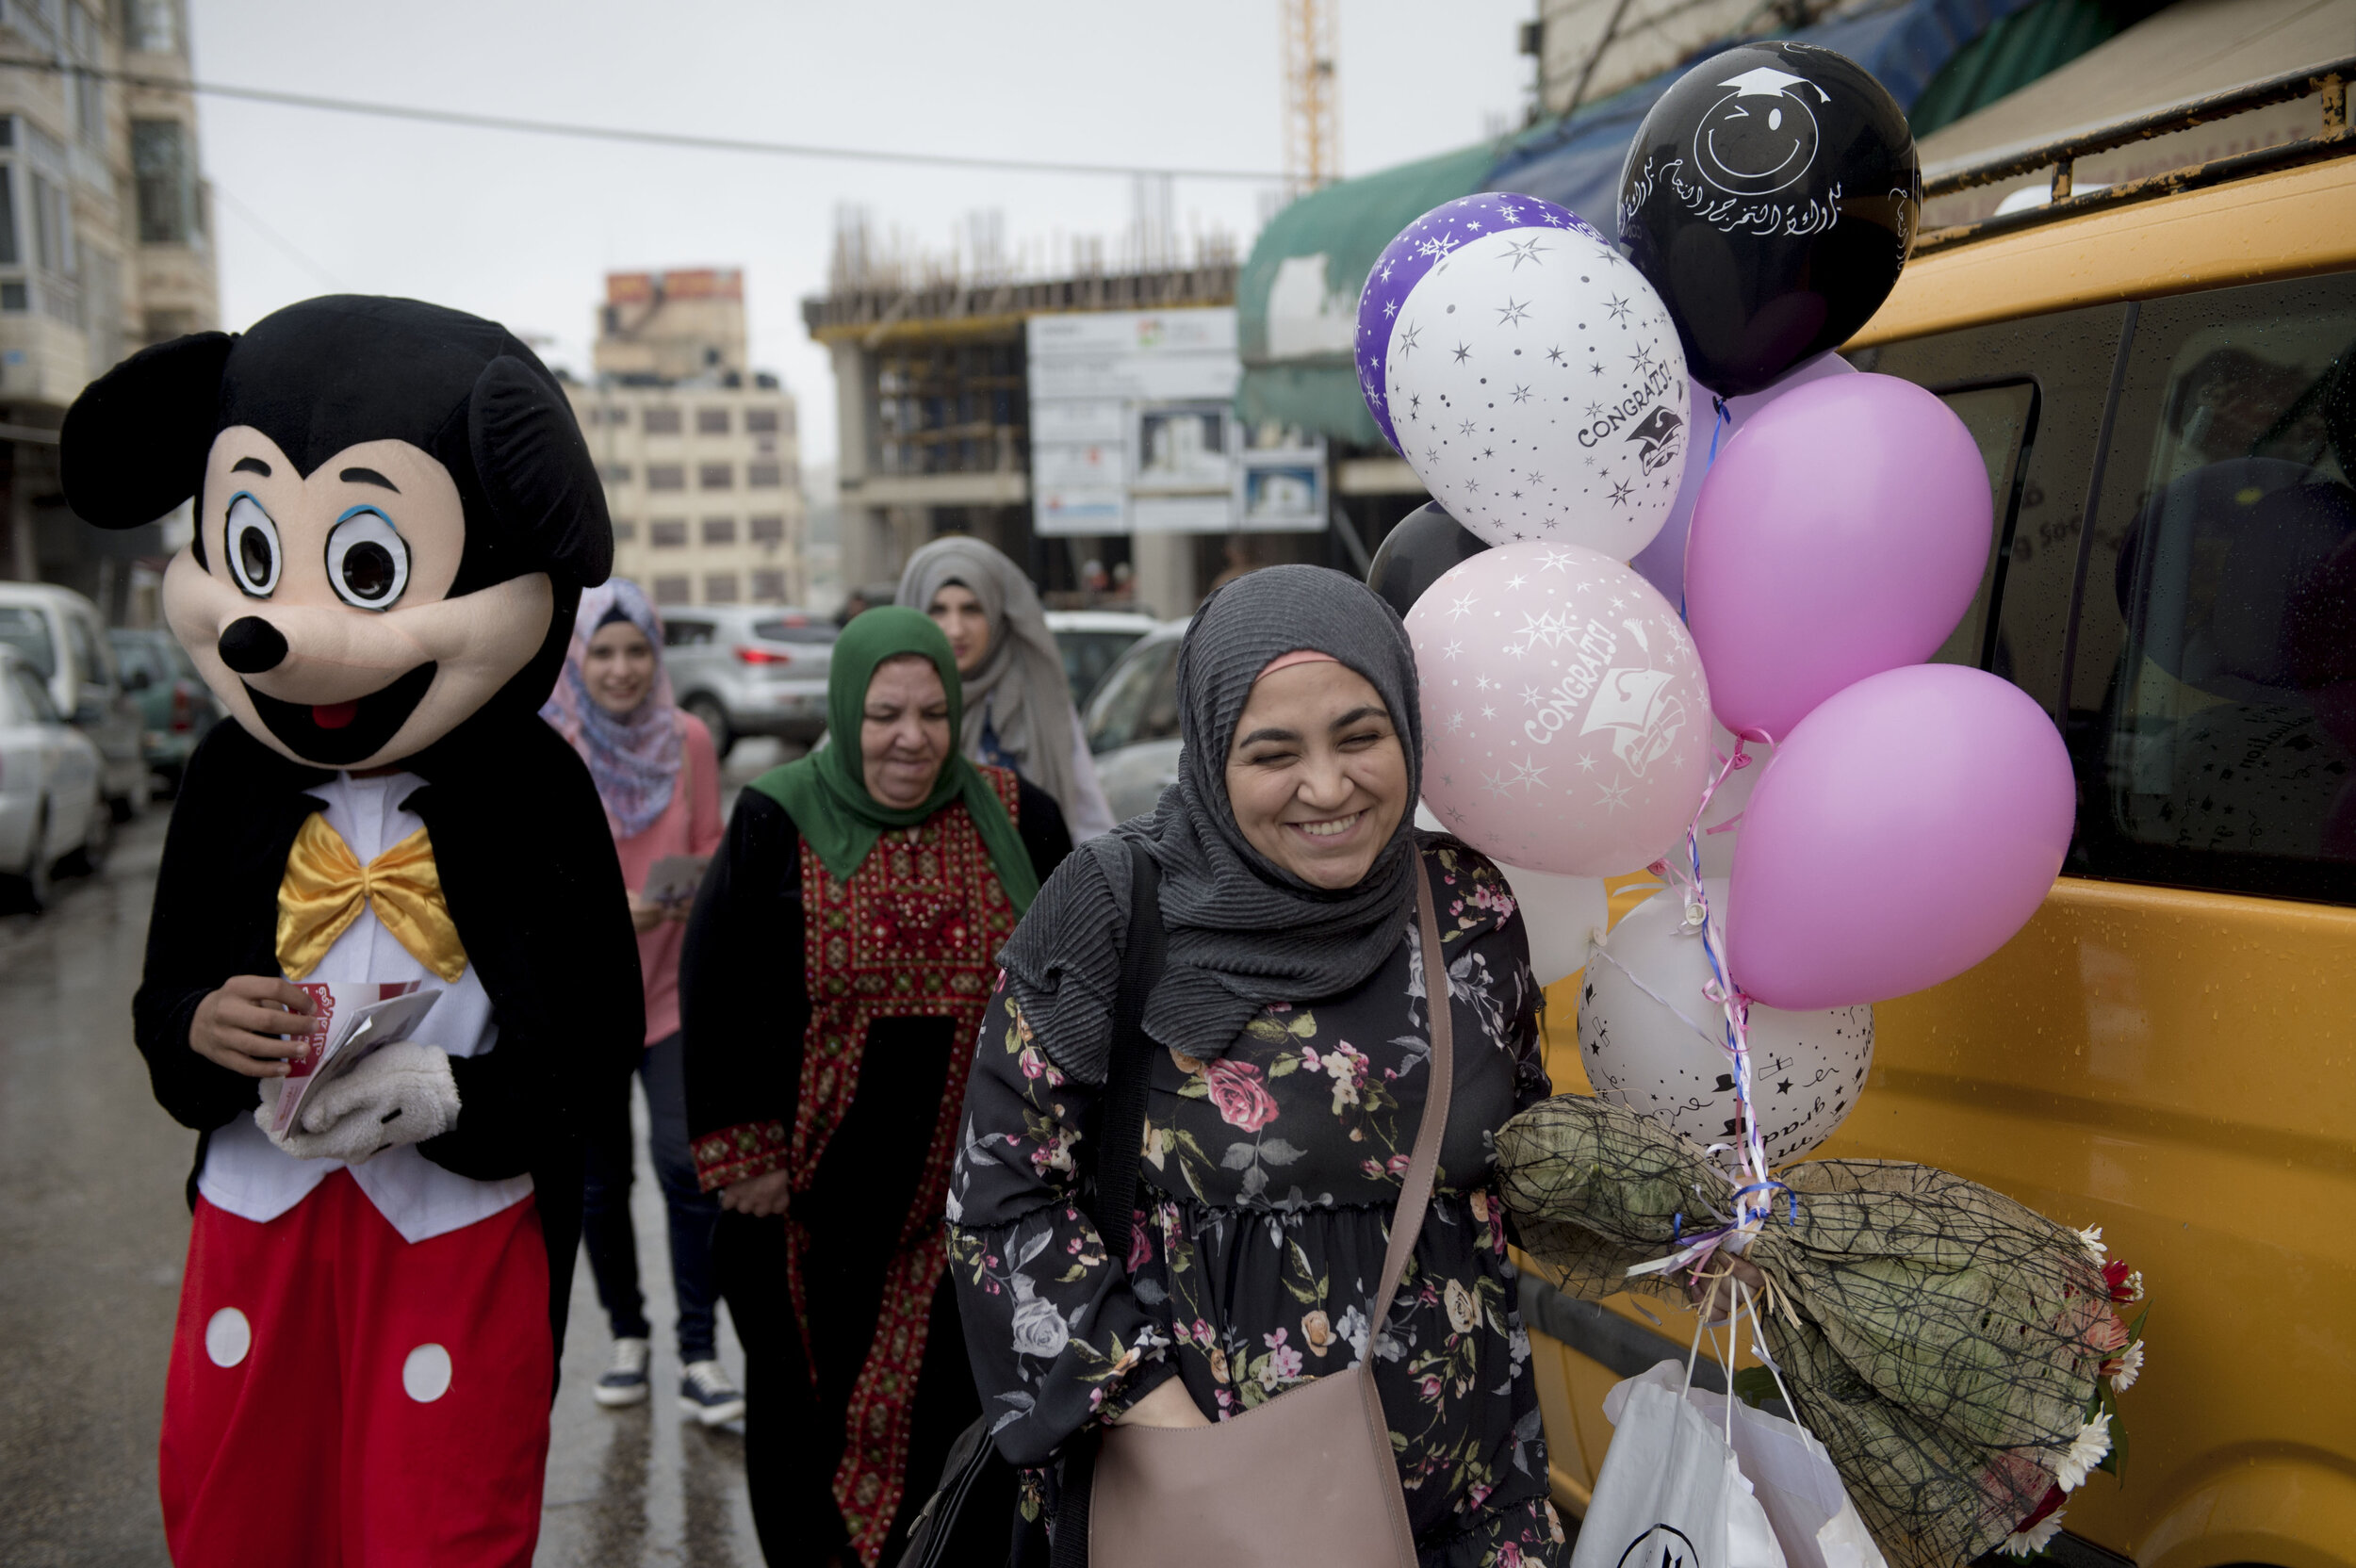  A Palestinian woman laughs as she interacts with a mascot at the opening of a new restaurant in downtown Ramallah in the Occupied West Bank. More and more Palestinians are venturing into running their own businesses in restaurants and commercial ret